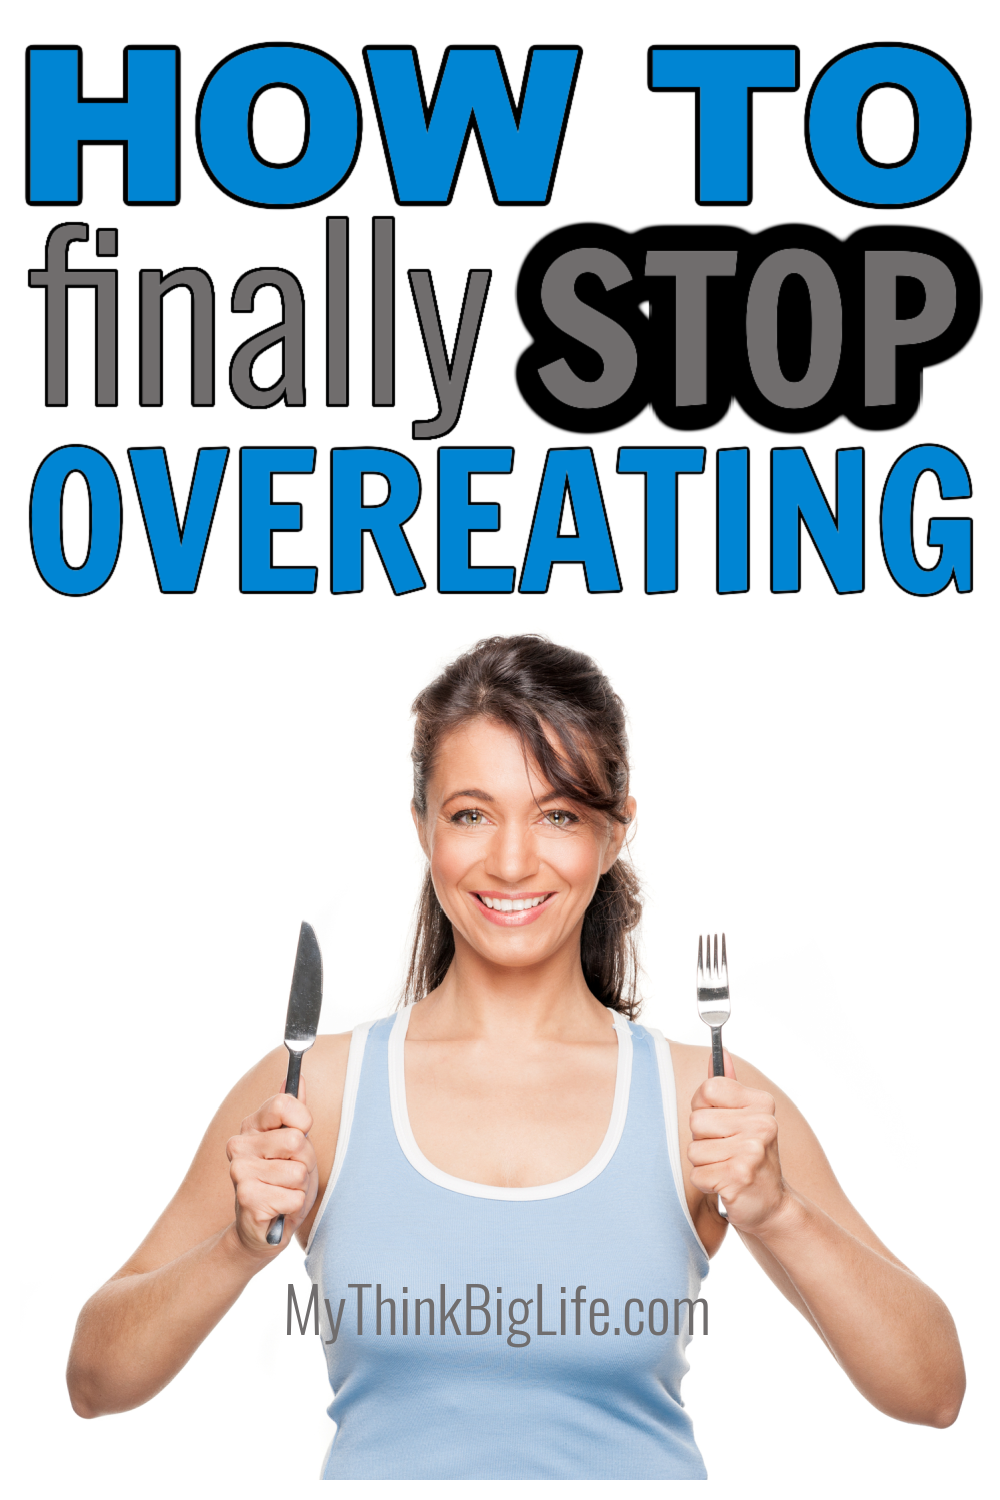 Picture of woman with fork and knife. Overeating is physically uncomfortable and it can also leave you with a feeling of shame and loss of control wondering how to stop overeating.